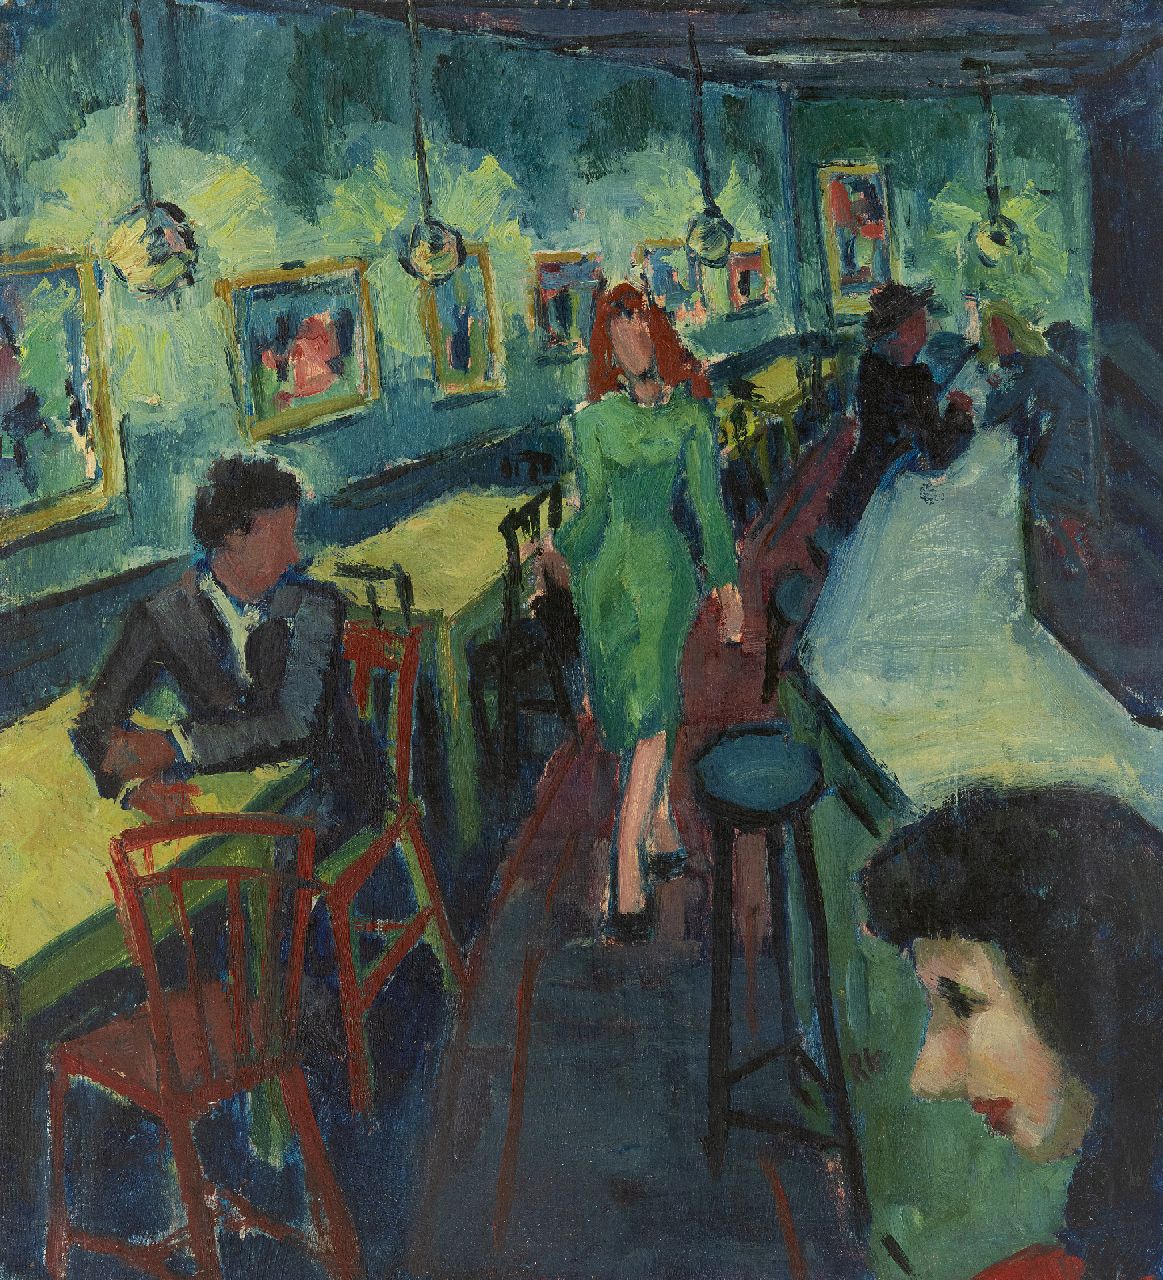 Goené M.A.G.  | Marinus Adrianus George 'Rien' Goené | Paintings offered for sale | Café in Paris, oil on canvas 45.3 x 40.2 cm, signed l.r. with initials and painted in 1957